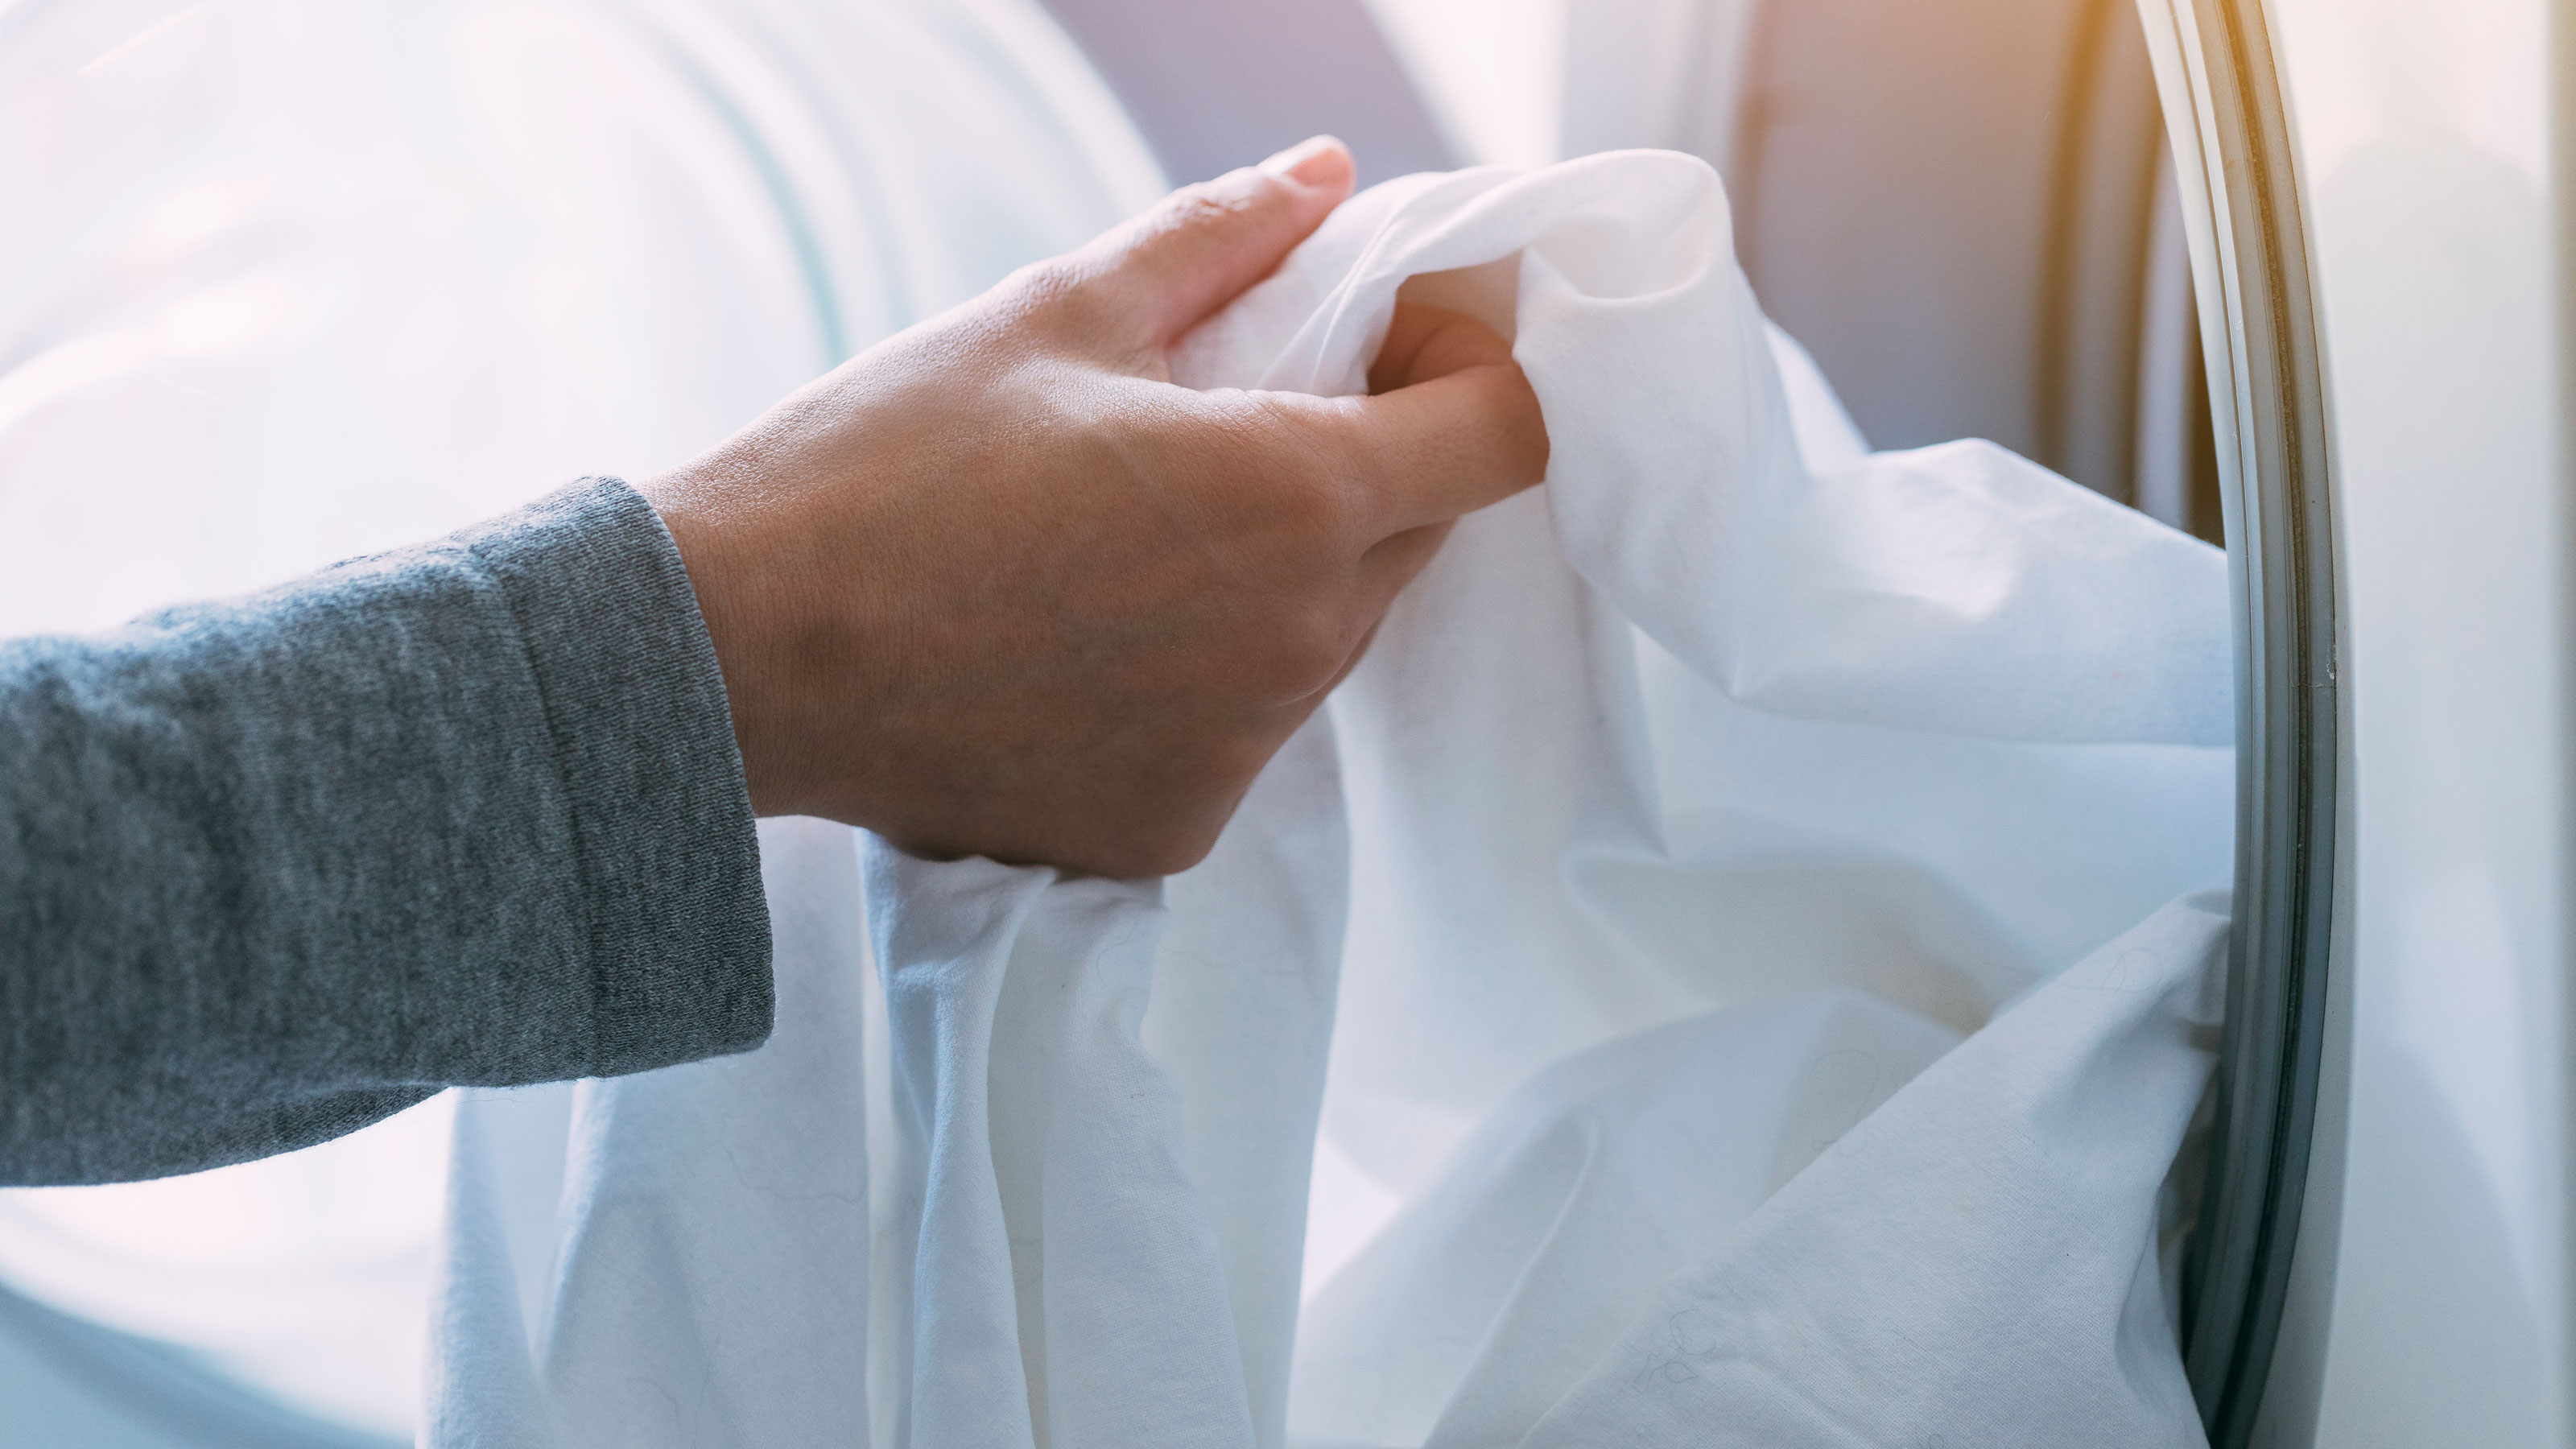 How To Keep Your Whites White, Laundry Tips